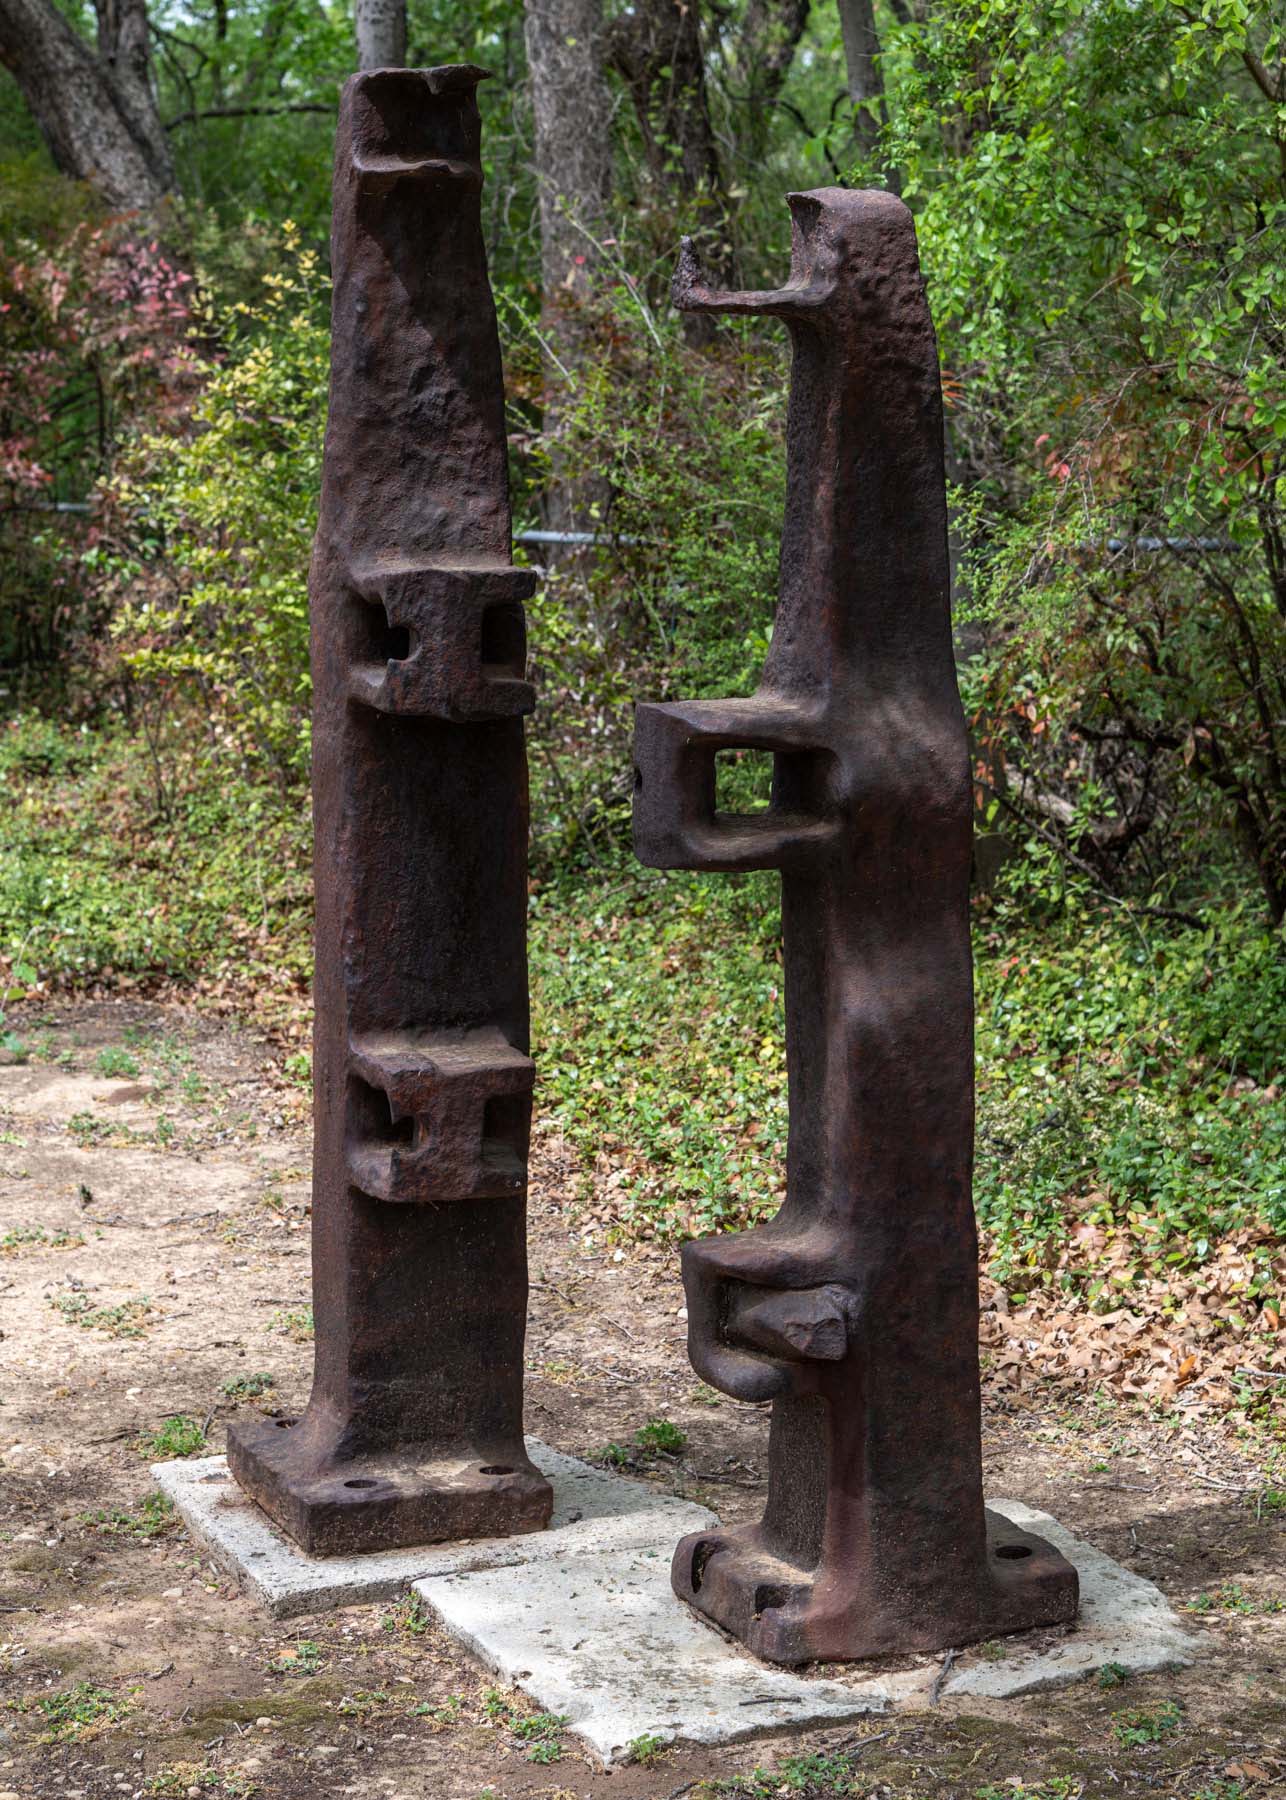 Two tall, rusty, industrial-looking totems with rectangular protrusions stand next to each other outdoors.